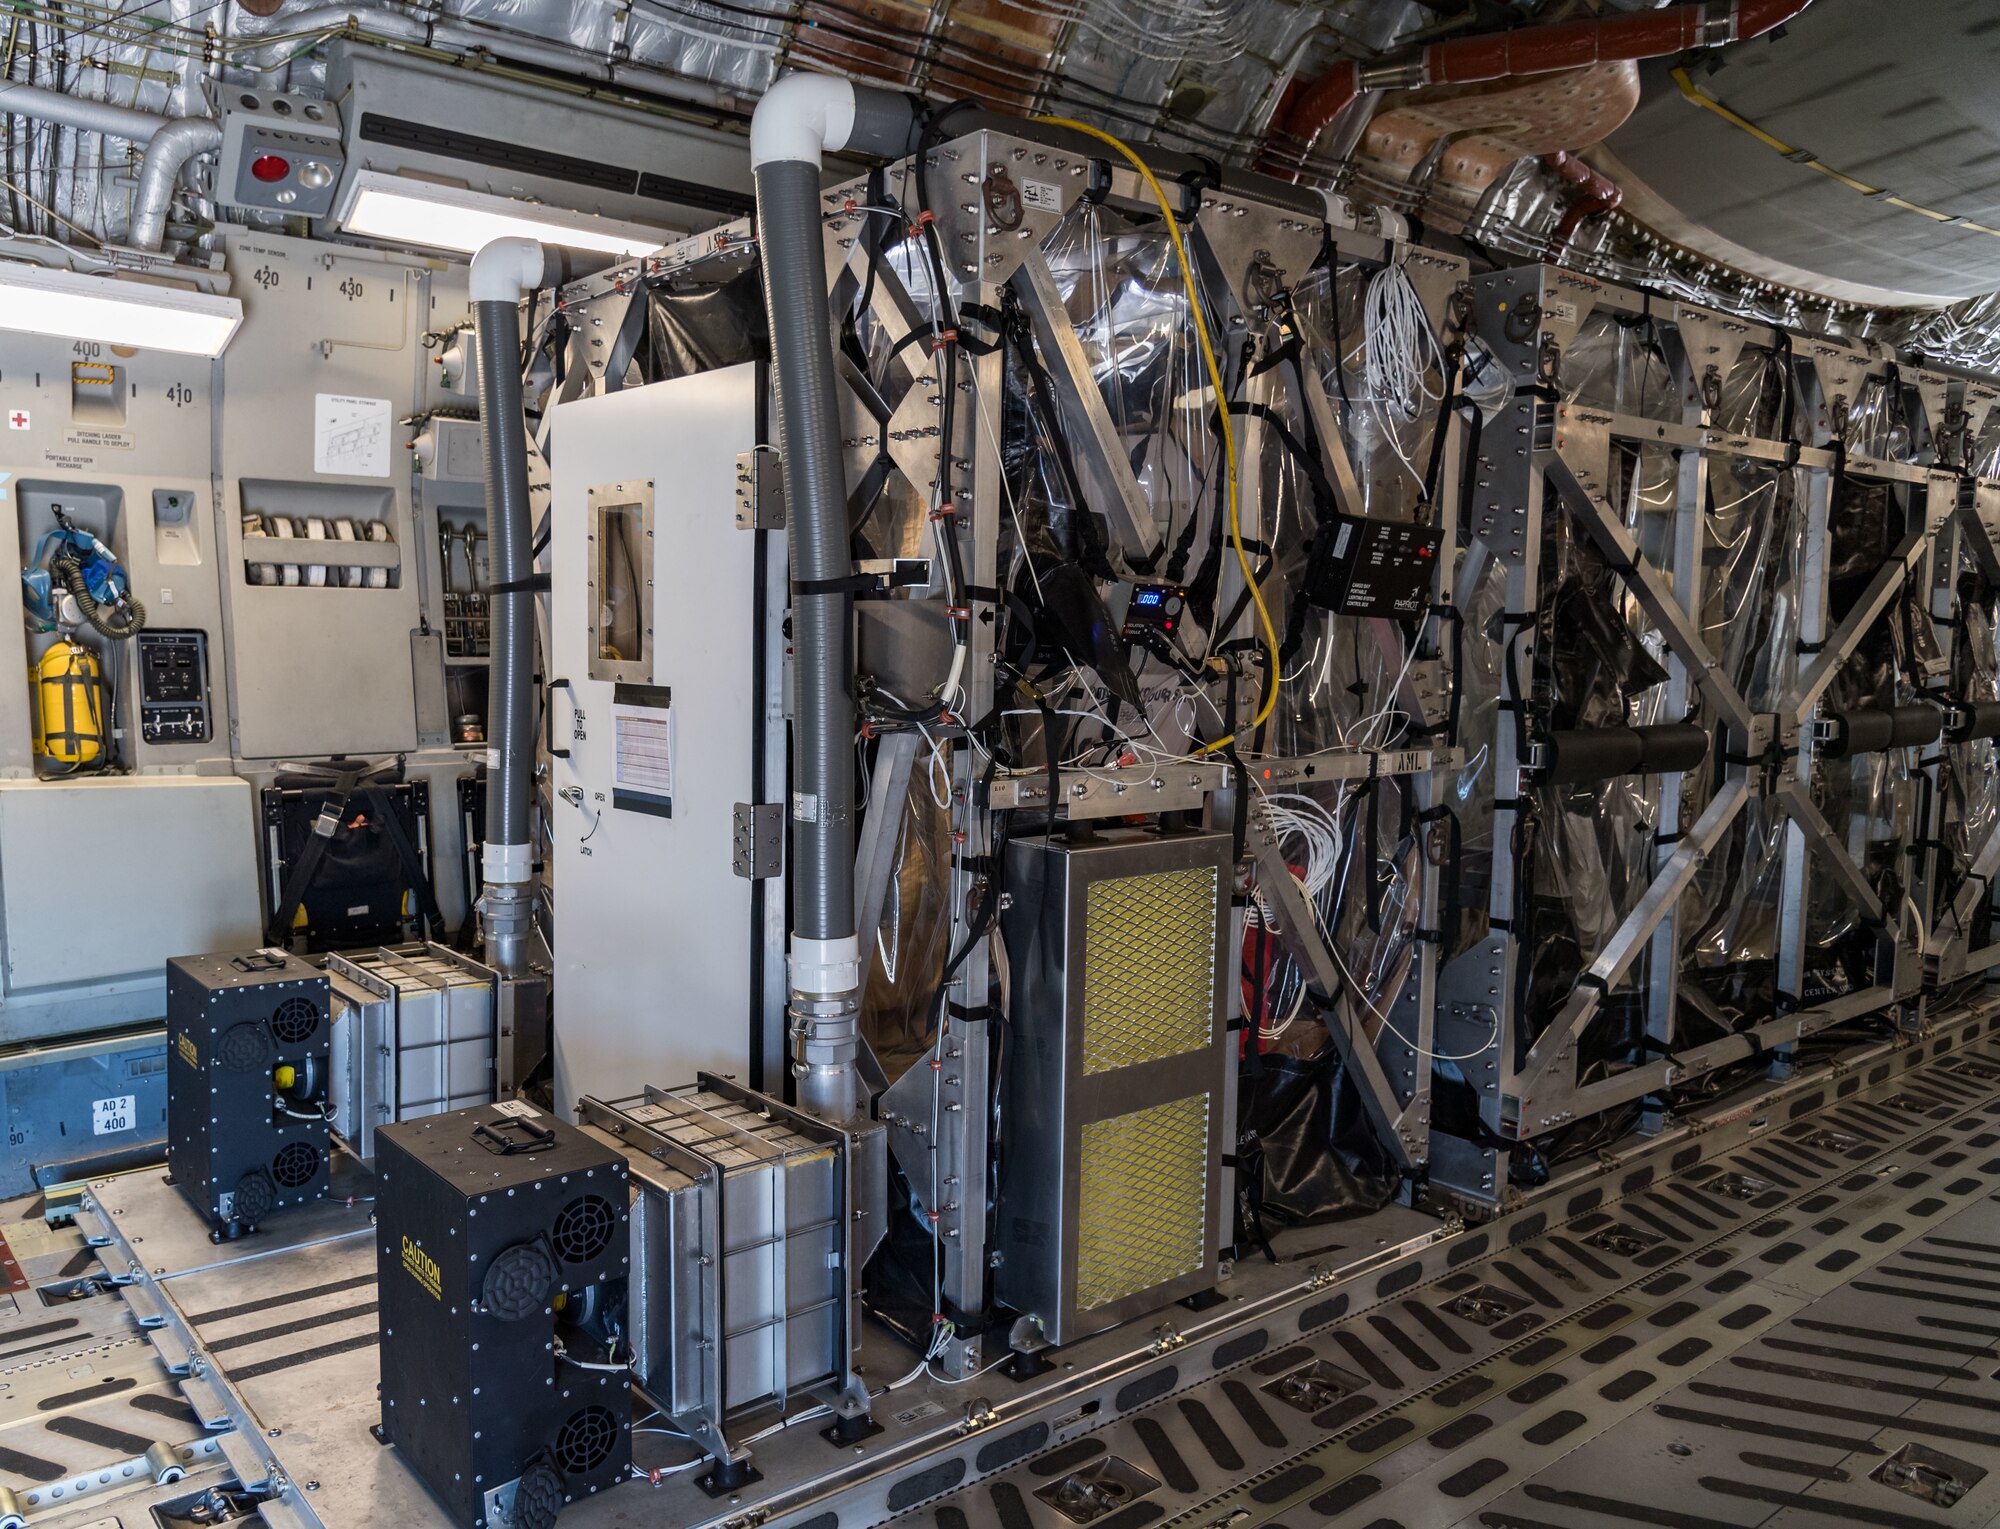 A Transport Isolation System unit used to transport COVID-19 patients is positioned on a C-17 Globemaster III, June 26, 2020, at Dover Air Force Base, Delaware. Two TIS units are located at Dover, which serves as the U.S. East Coast hub due to its location and support facilities. (U.S. Air Force photo by Roland Balik)